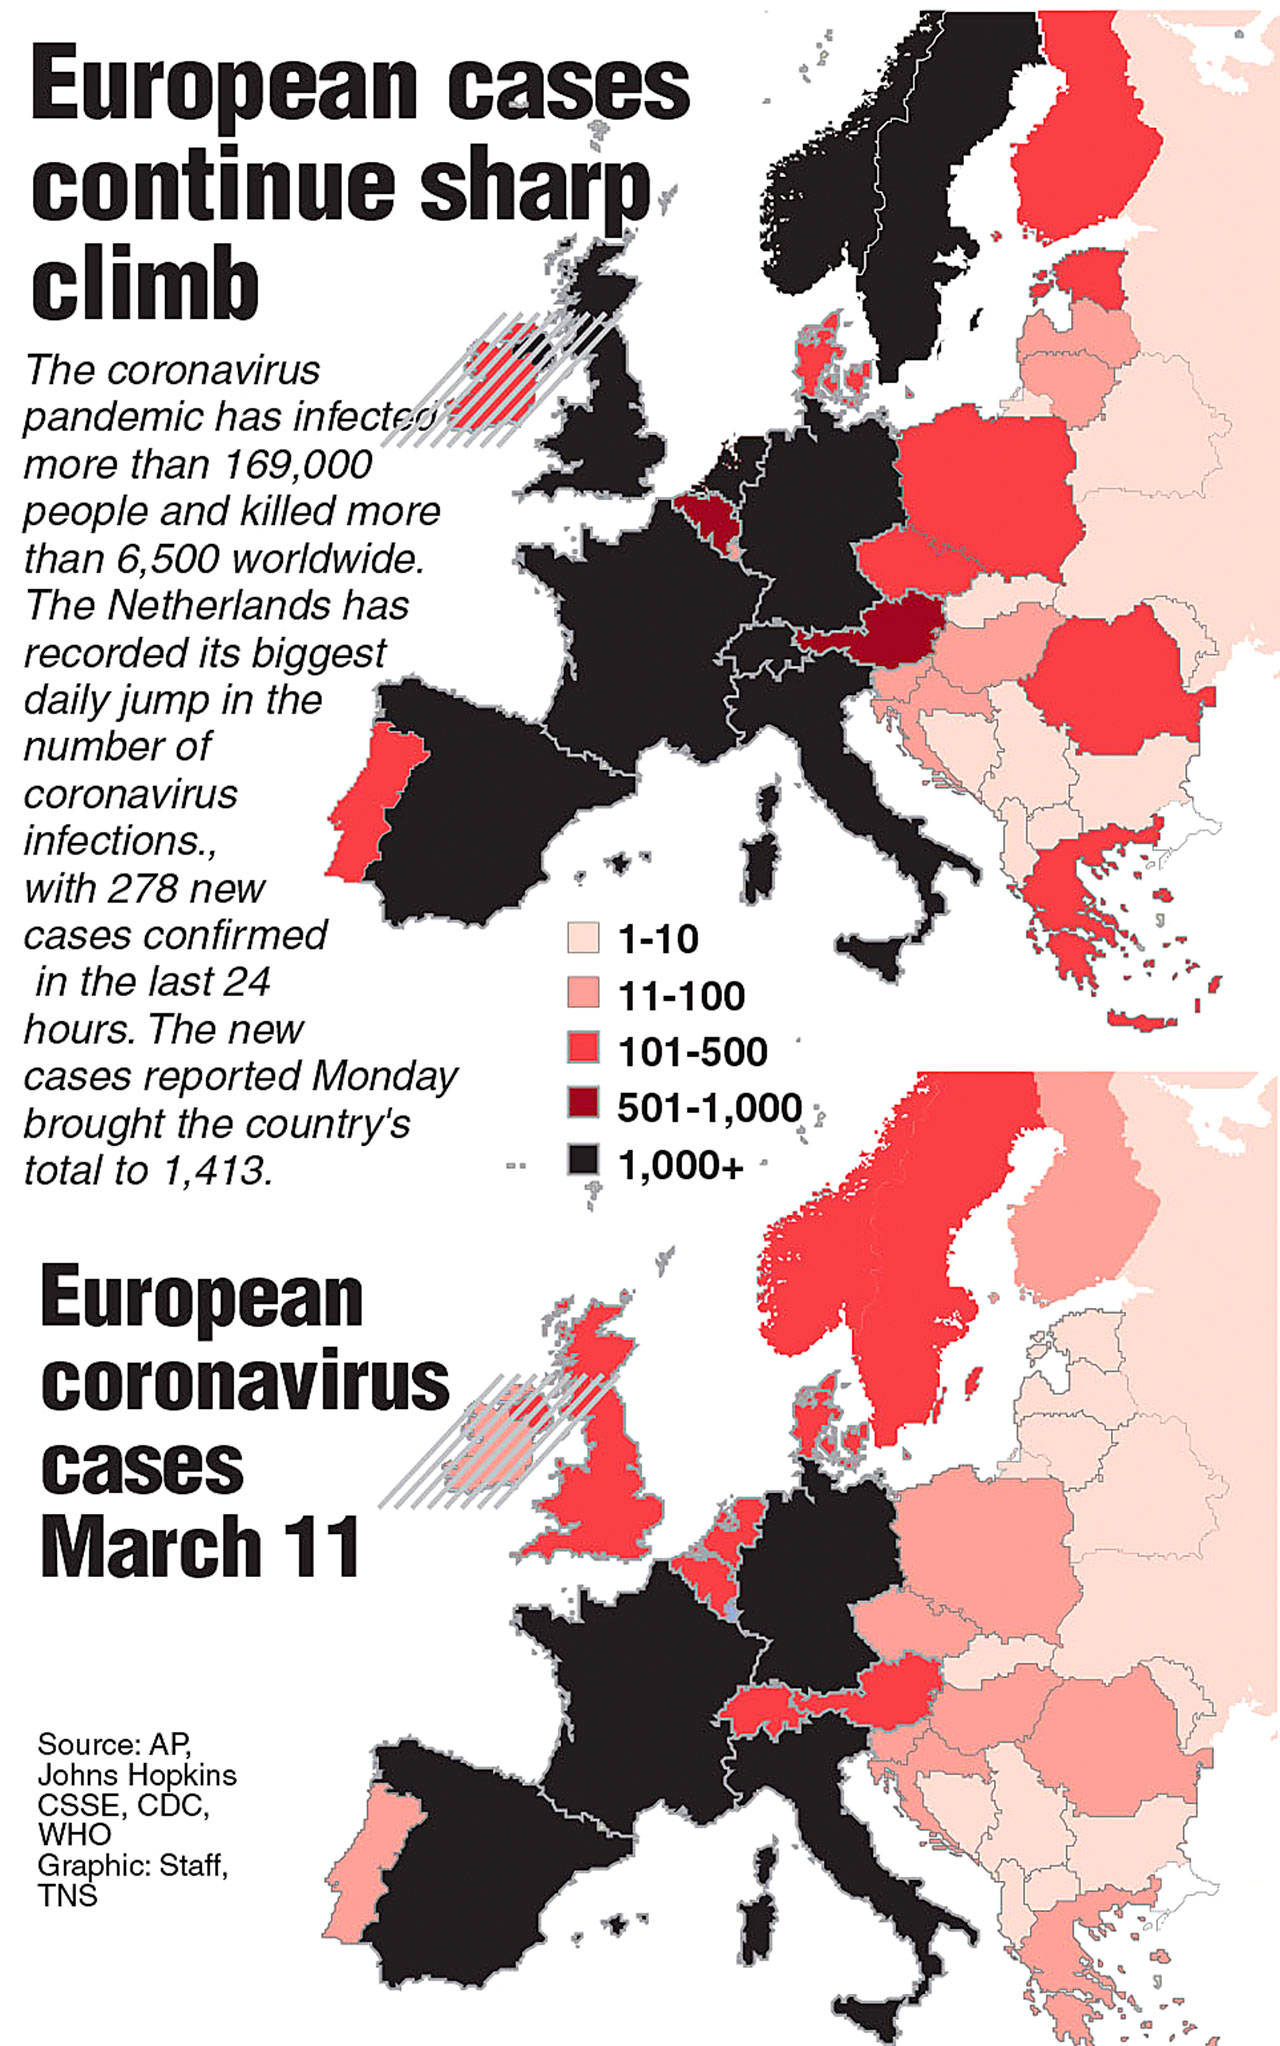 EU set to impose 30-day entry restrictions to counter coronavirus